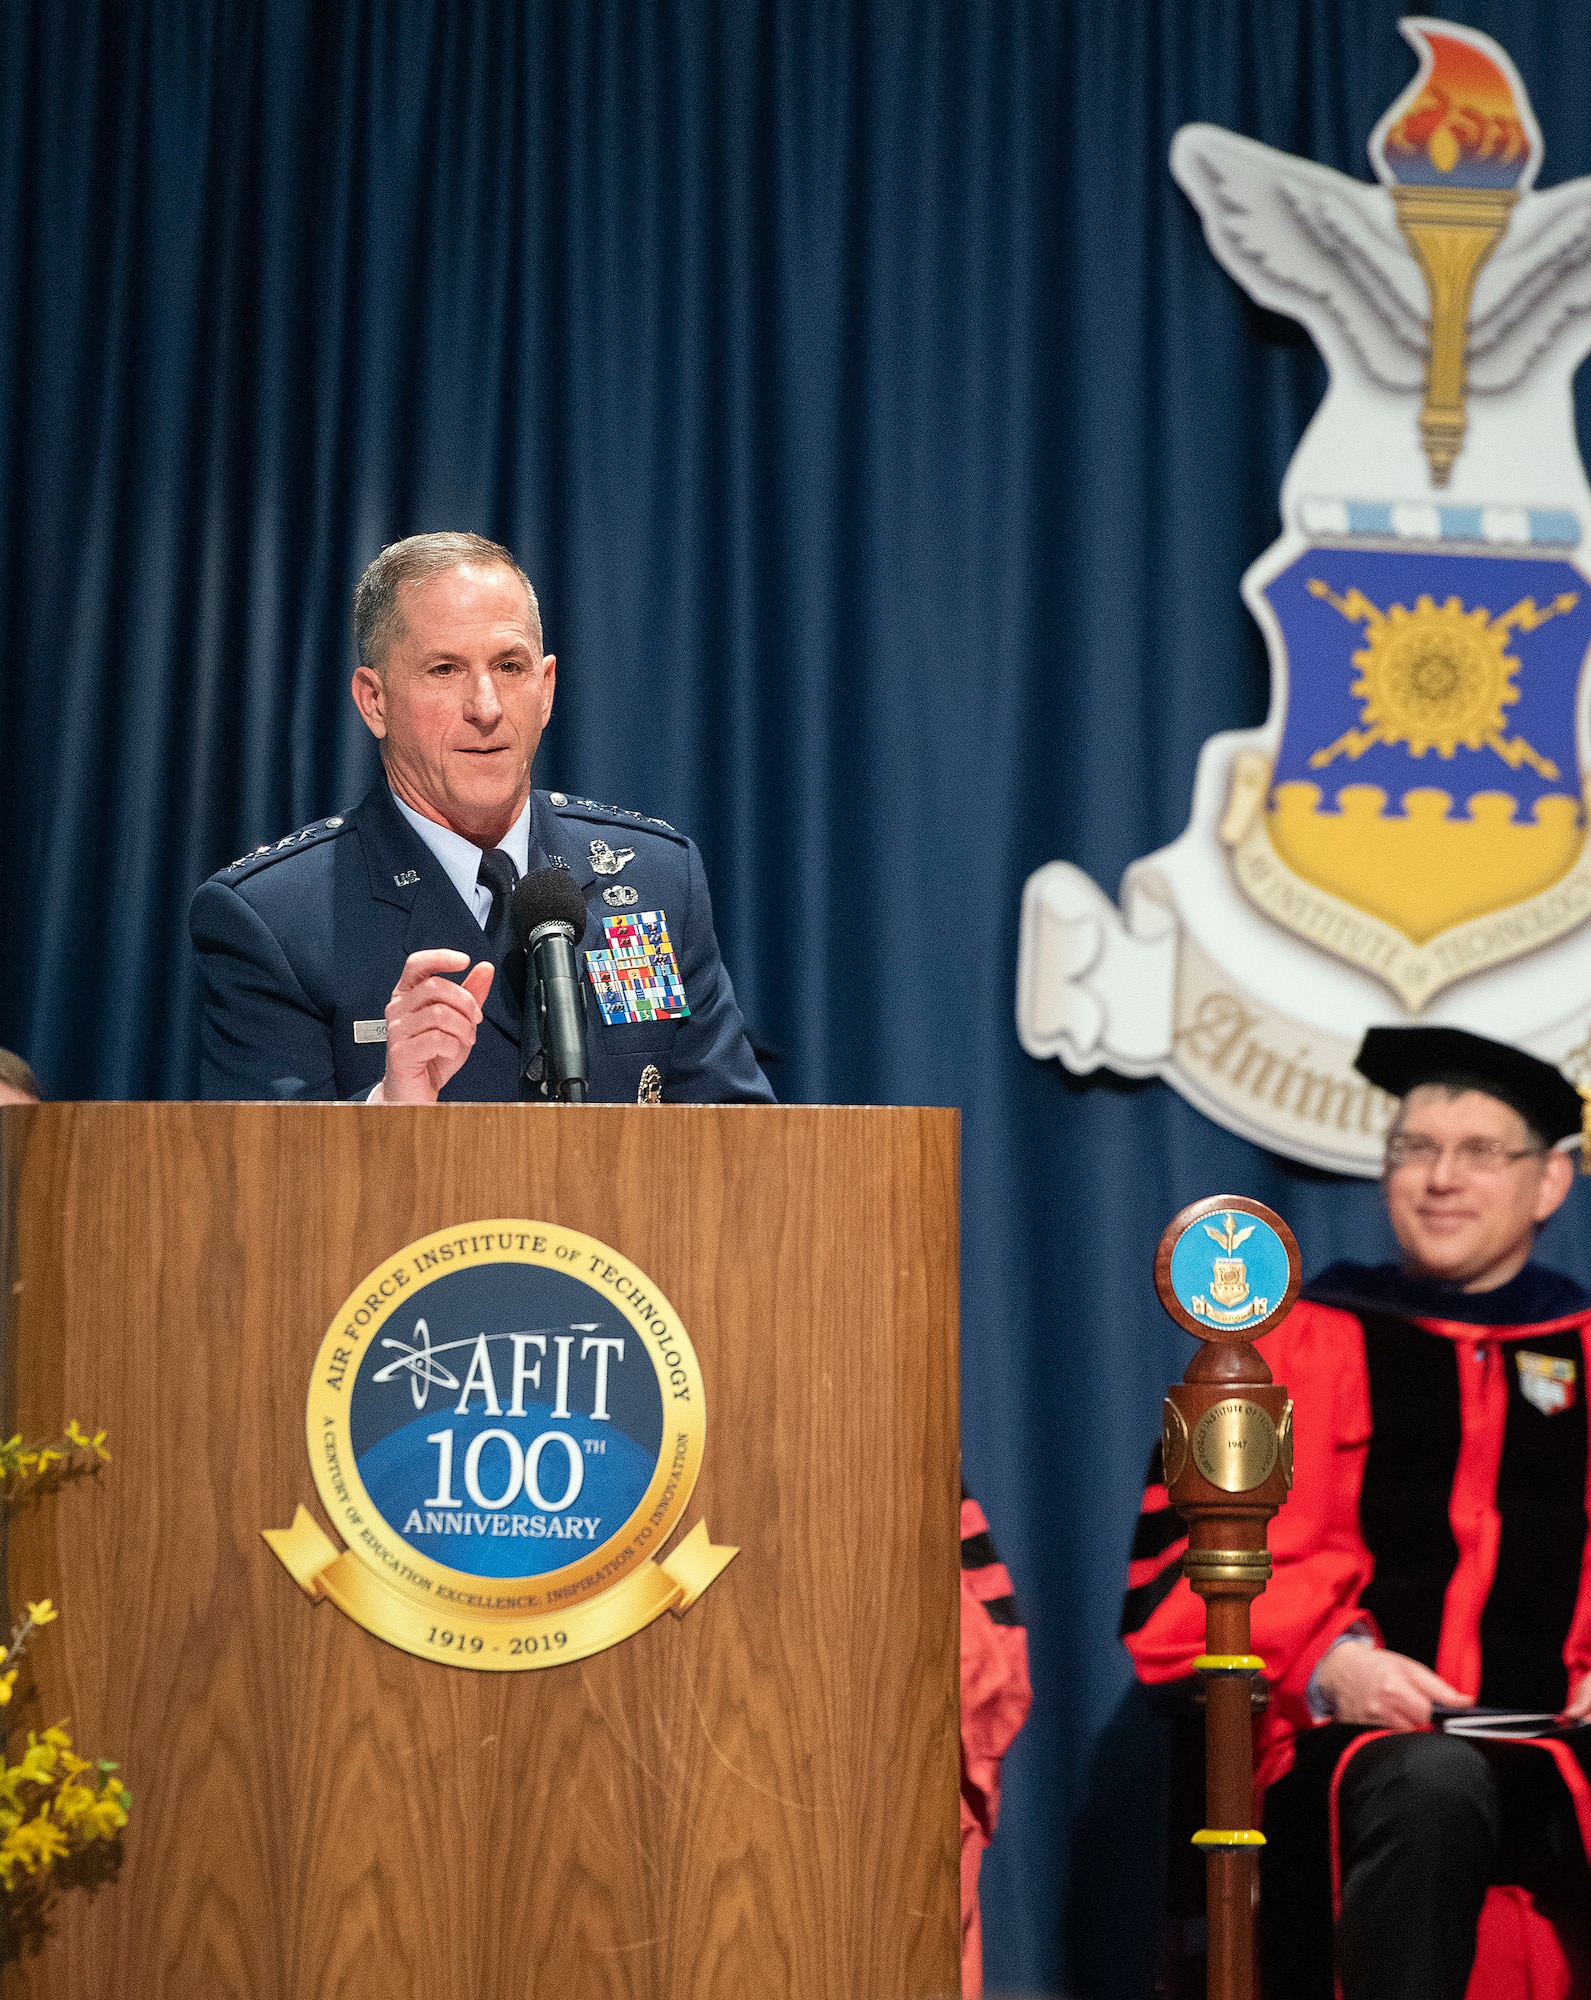 Gen. David L. Goldfein, U.S. Air Force chief of staff, gives the commencement address at the Air Force Institute of Technology graduation ceremony March 21, 2019, in the National Museum of the U.S. Air Force on Wright-Patterson Air Force Base, Ohio. Graduates earned a total of 214 Master of Science degrees and 20 Doctor of Philosophy degrees, which were presented during the ceremony. (U.S. Air Force photo by R.J. Oriez)